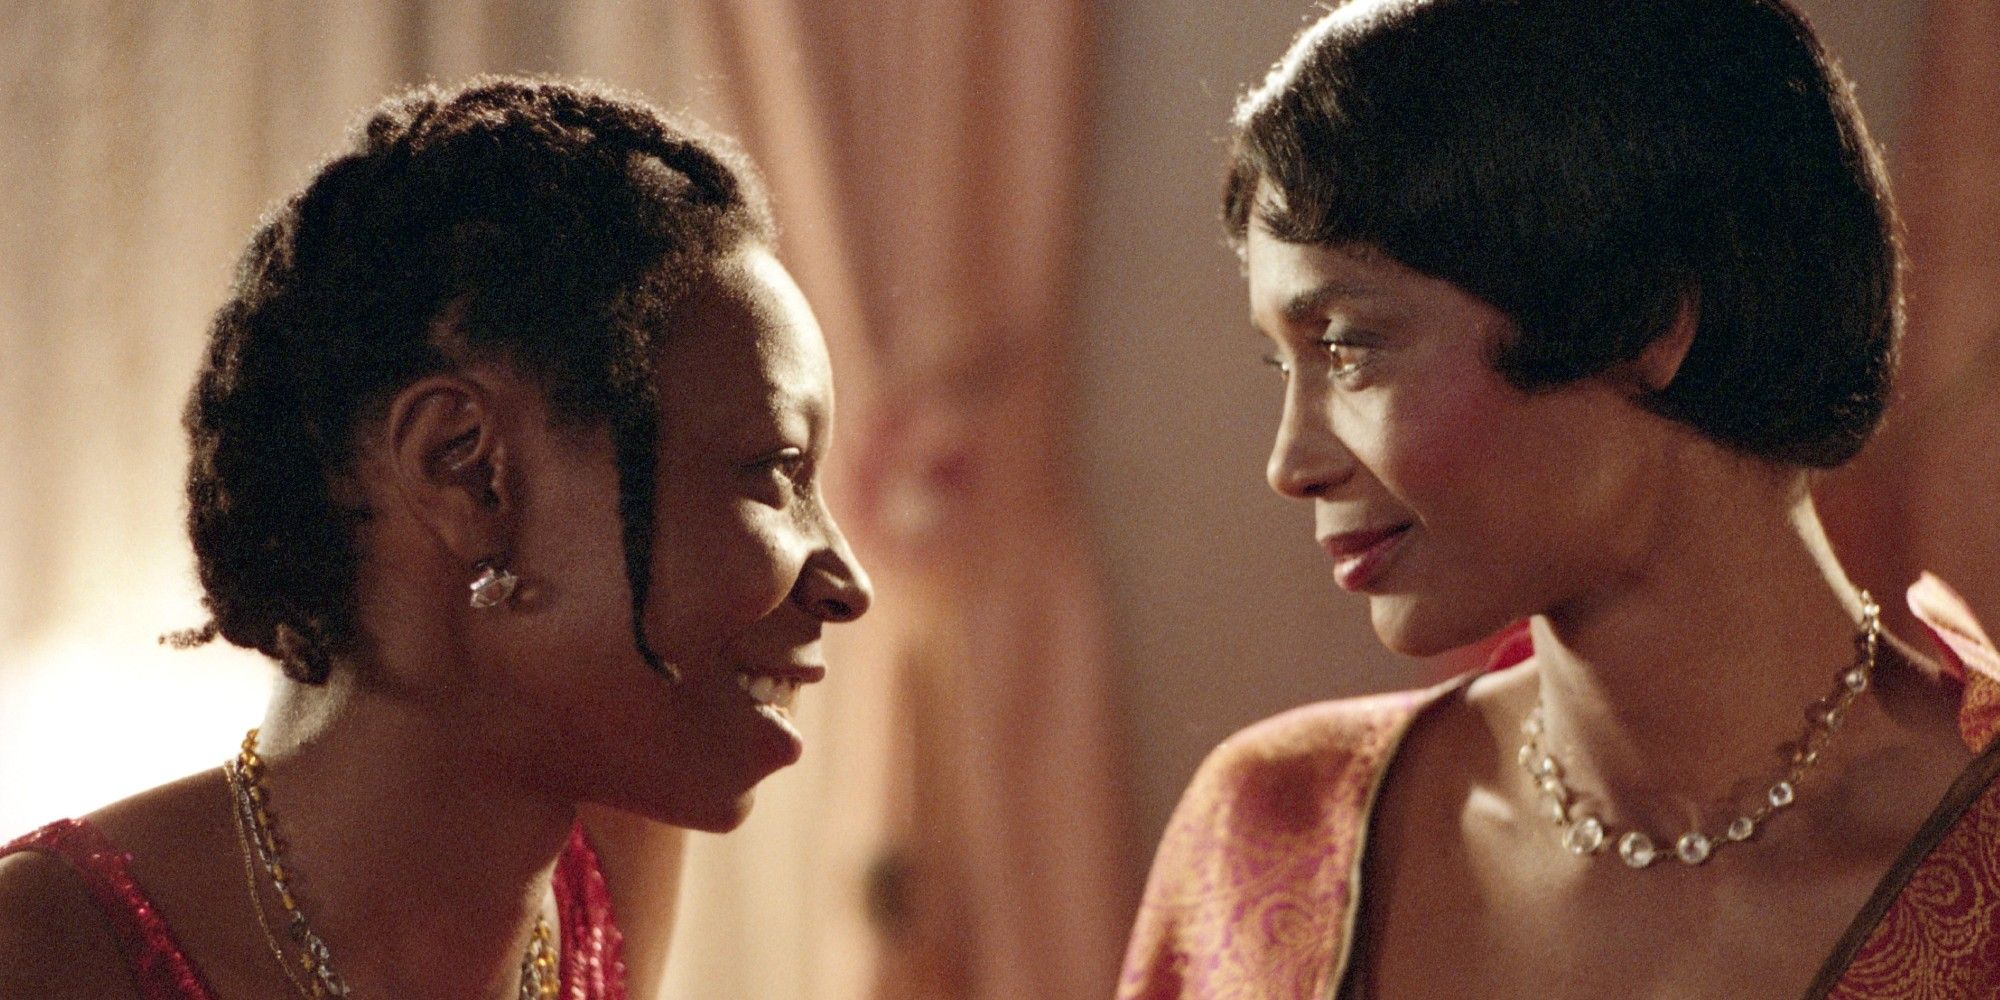 Celie and Shug talking in The Color Purple